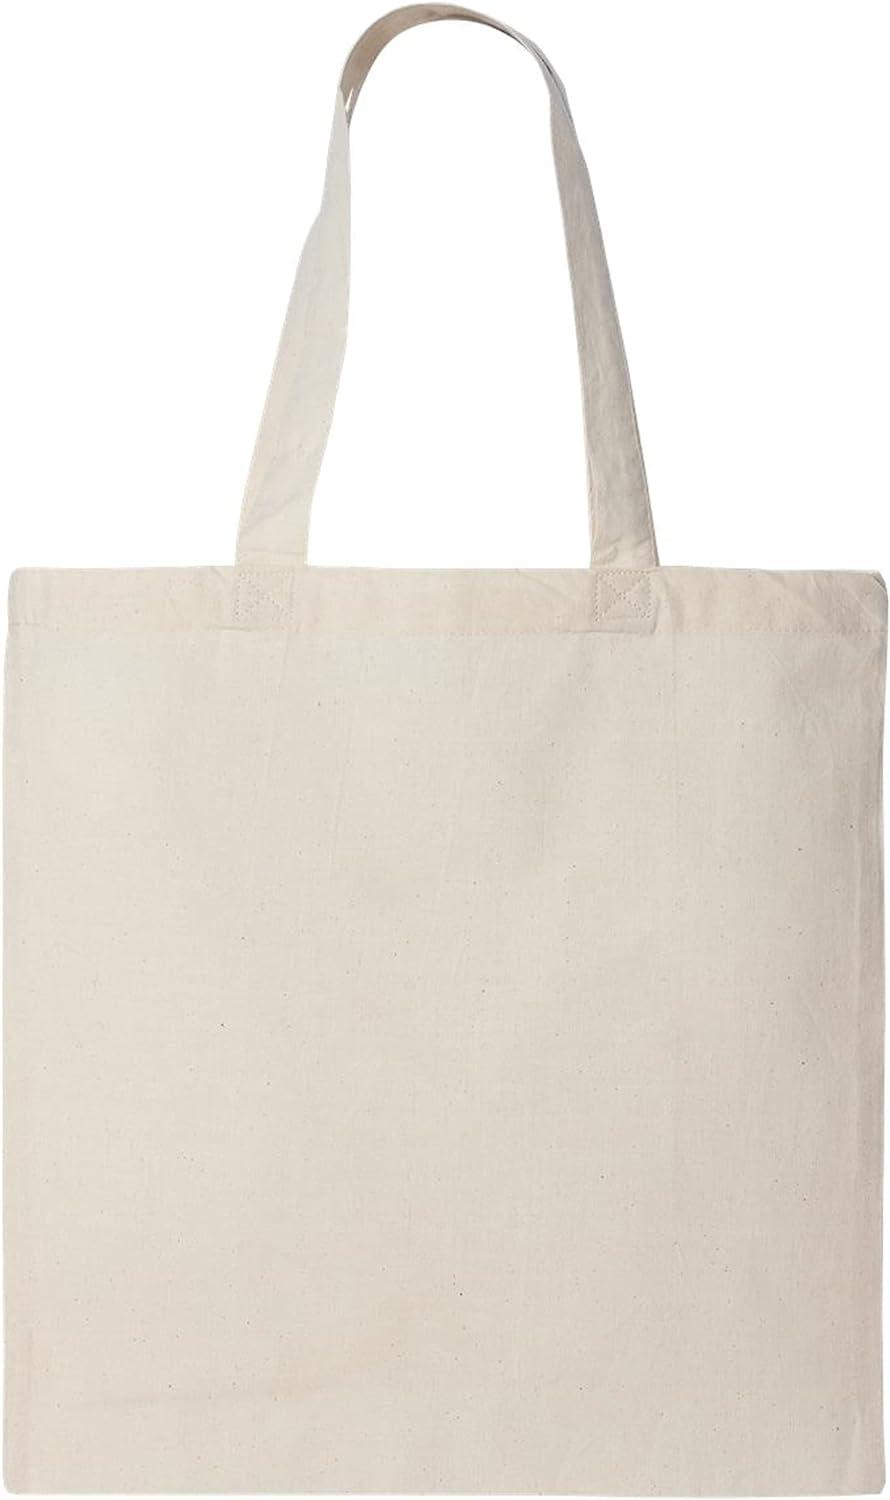  Sturdy Blank Canvas Tote Bags in Bulk - 12 Pack - Customizable Canvas  Bags Wholesale for Printing, Embroidery, Heat Transfer, Paint and More! :  Home & Kitchen